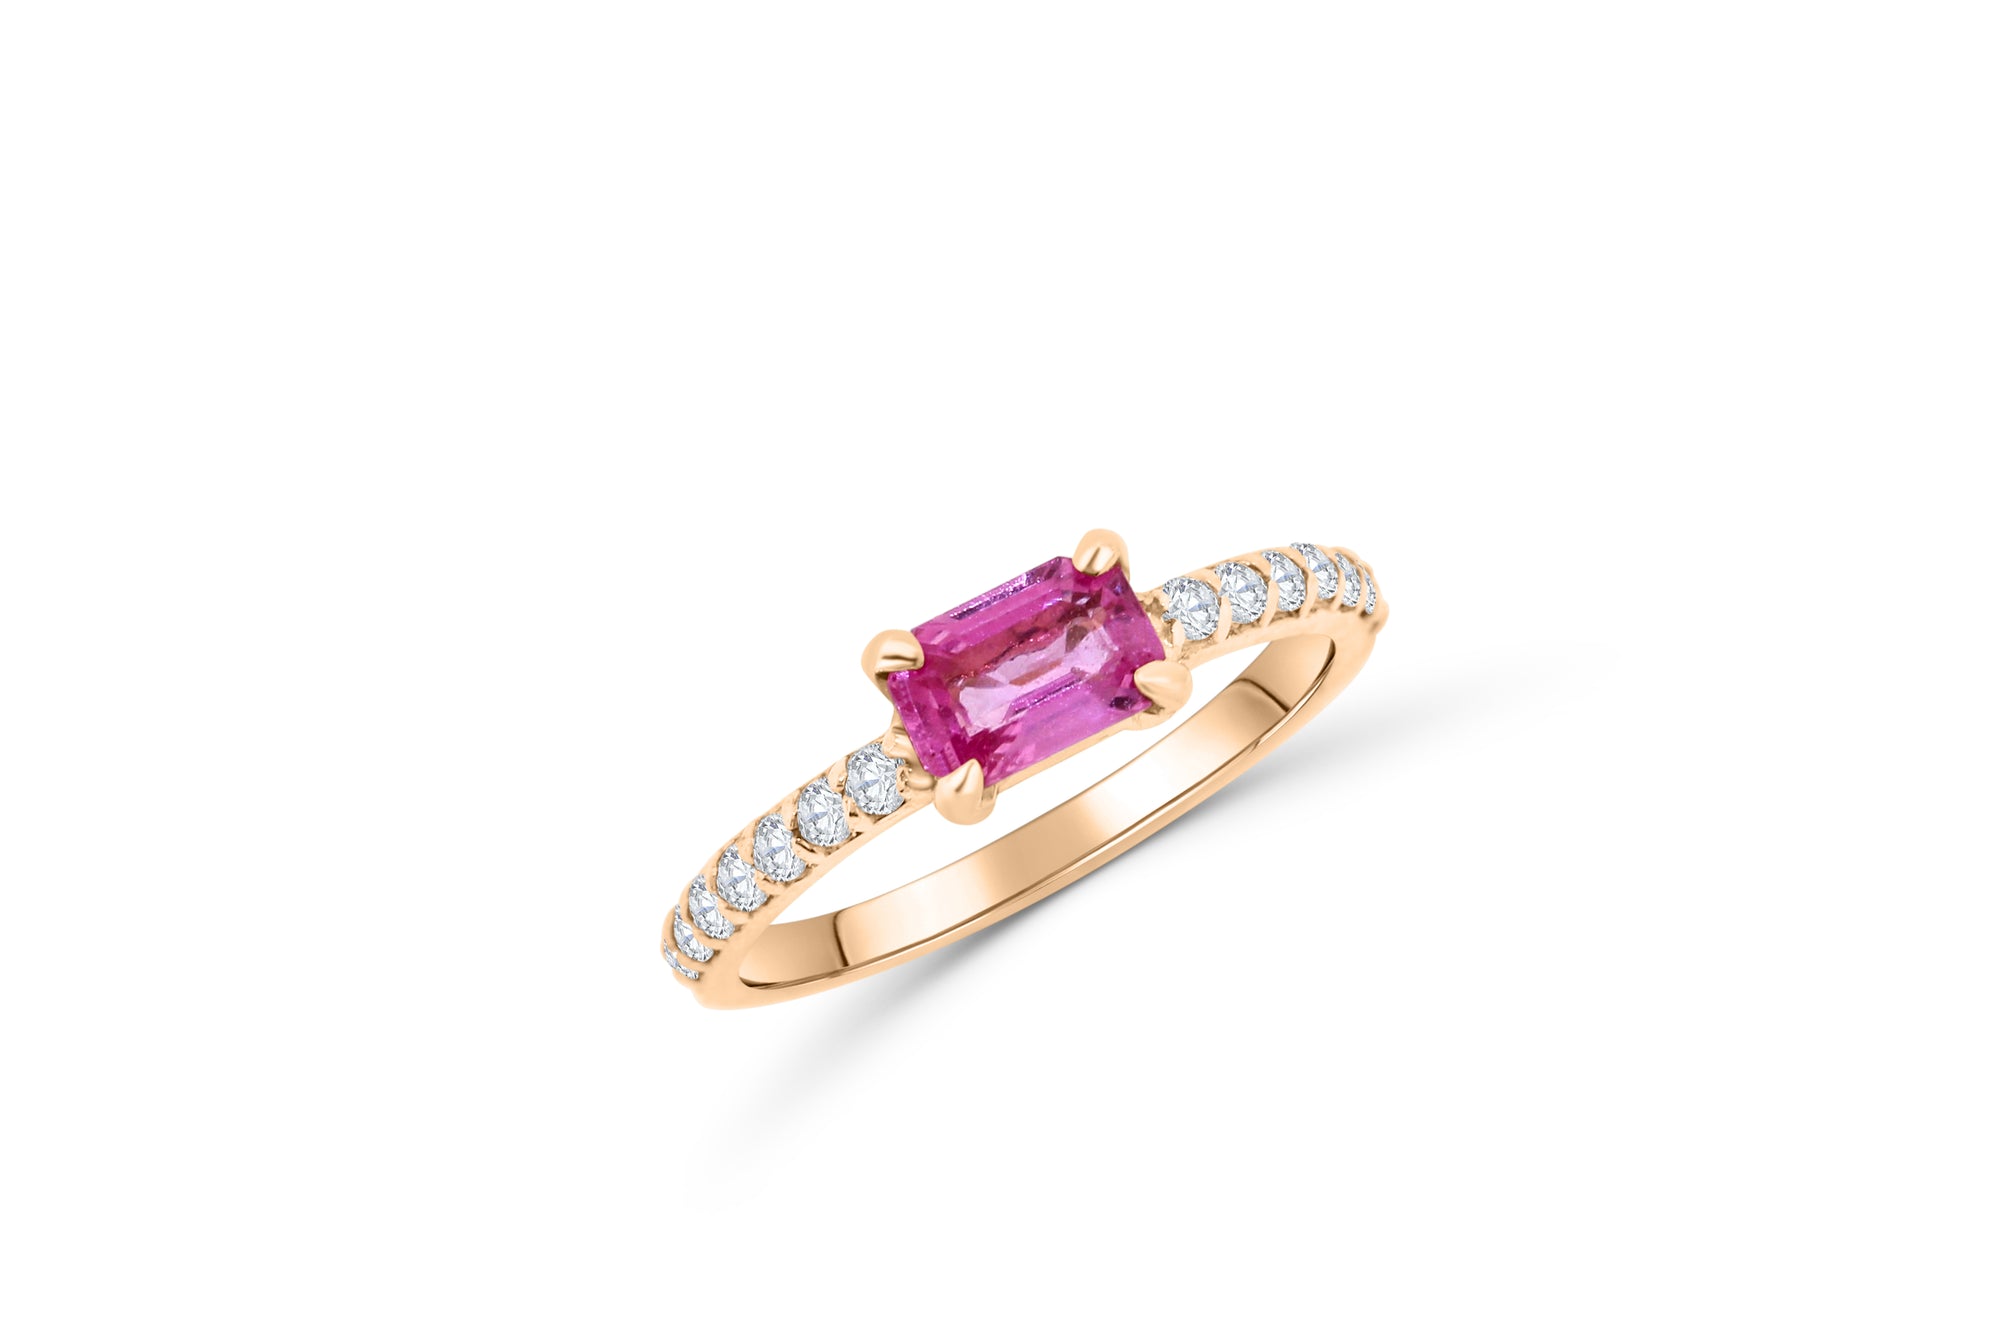 0.80 CT Emerald Cut Pink Sapphire Diamond Ring 0.28 CT TW 14K Rose Gold PSR004 - NorthandSouthJewelry